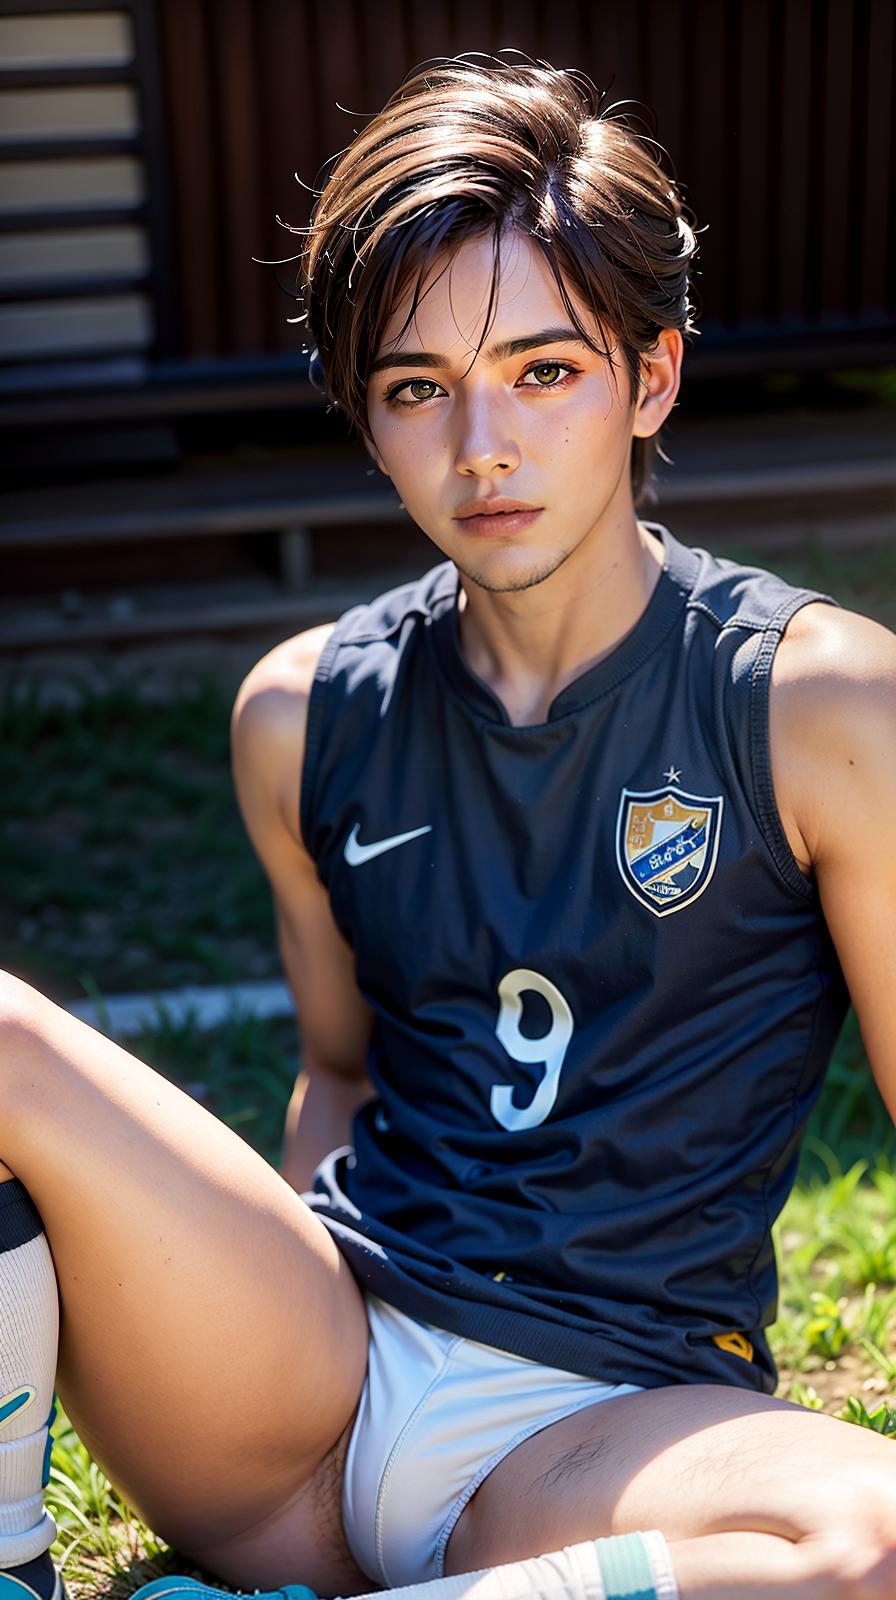  ultra high res, (photorealistic:1.4), raw photo, (realistic face), realistic eyes, (realistic skin), <lora:XXMix9_v20LoRa:0.8>, handsome, (male:2), (man:1.5), (soccer players:1.2), (short hair:1.2), (pompadour:1.4), (white briefs:1.3), (sleeveless:1.2), spike shoes, (soccer shin guards:1.3), young, sitting posture, (spread legs:1.1), real skin, (sexy posing:1.3), hot guy, (muscular:1.3), (naked:1.1), (bulge:1.1), trained calves, thigh, realistic, lifelike, high quality, photos taken with a single-lens reflex camera, (looking at the camera:1.2)